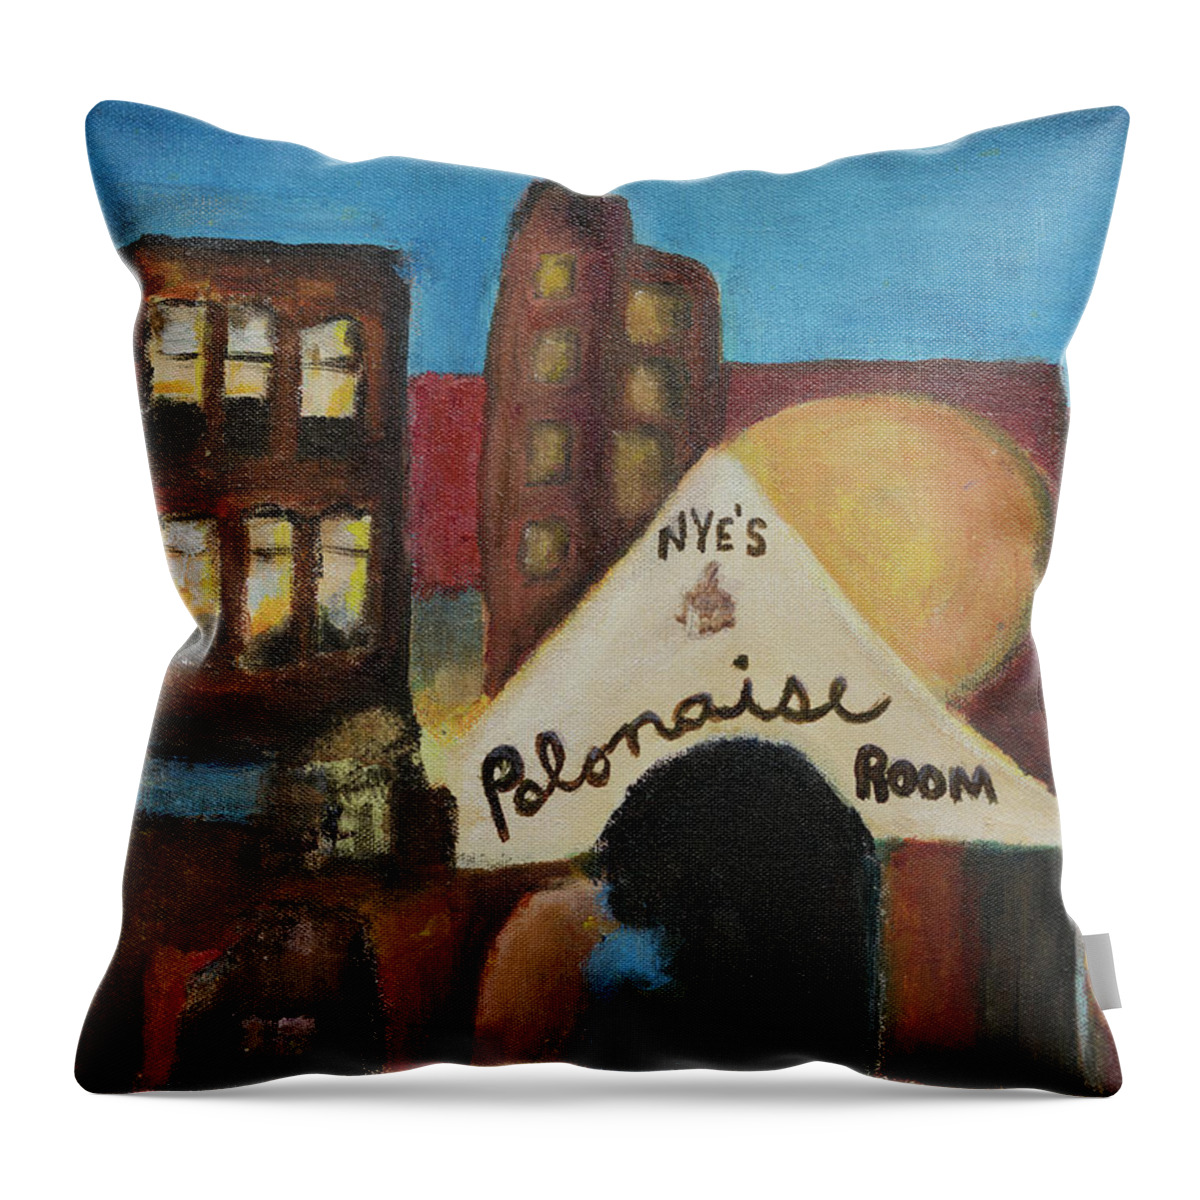 Nye's Throw Pillow featuring the painting Nye's Polonaise Room #3 by Susan Stone